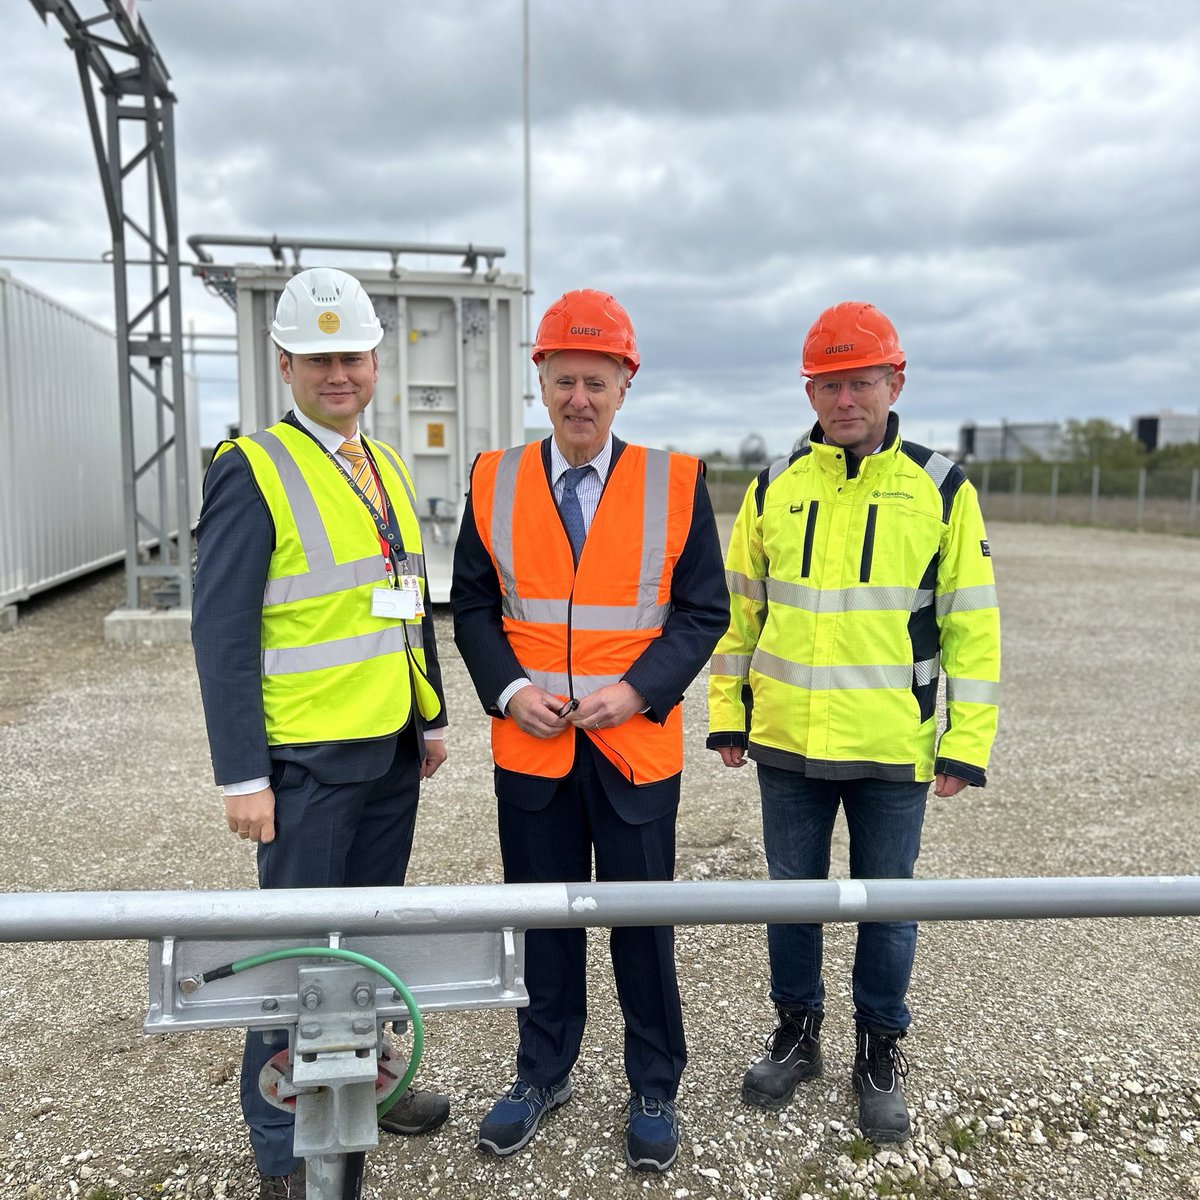 Fascinating visit to @EverfuelEU HySynergy PtX facility, advancing green hydrogen production in Denmark!  Discussed future prospects with Director Ulrik Torp Svendsen, exploring opportunities for U.S.-Denmark collaboration in the green transition.